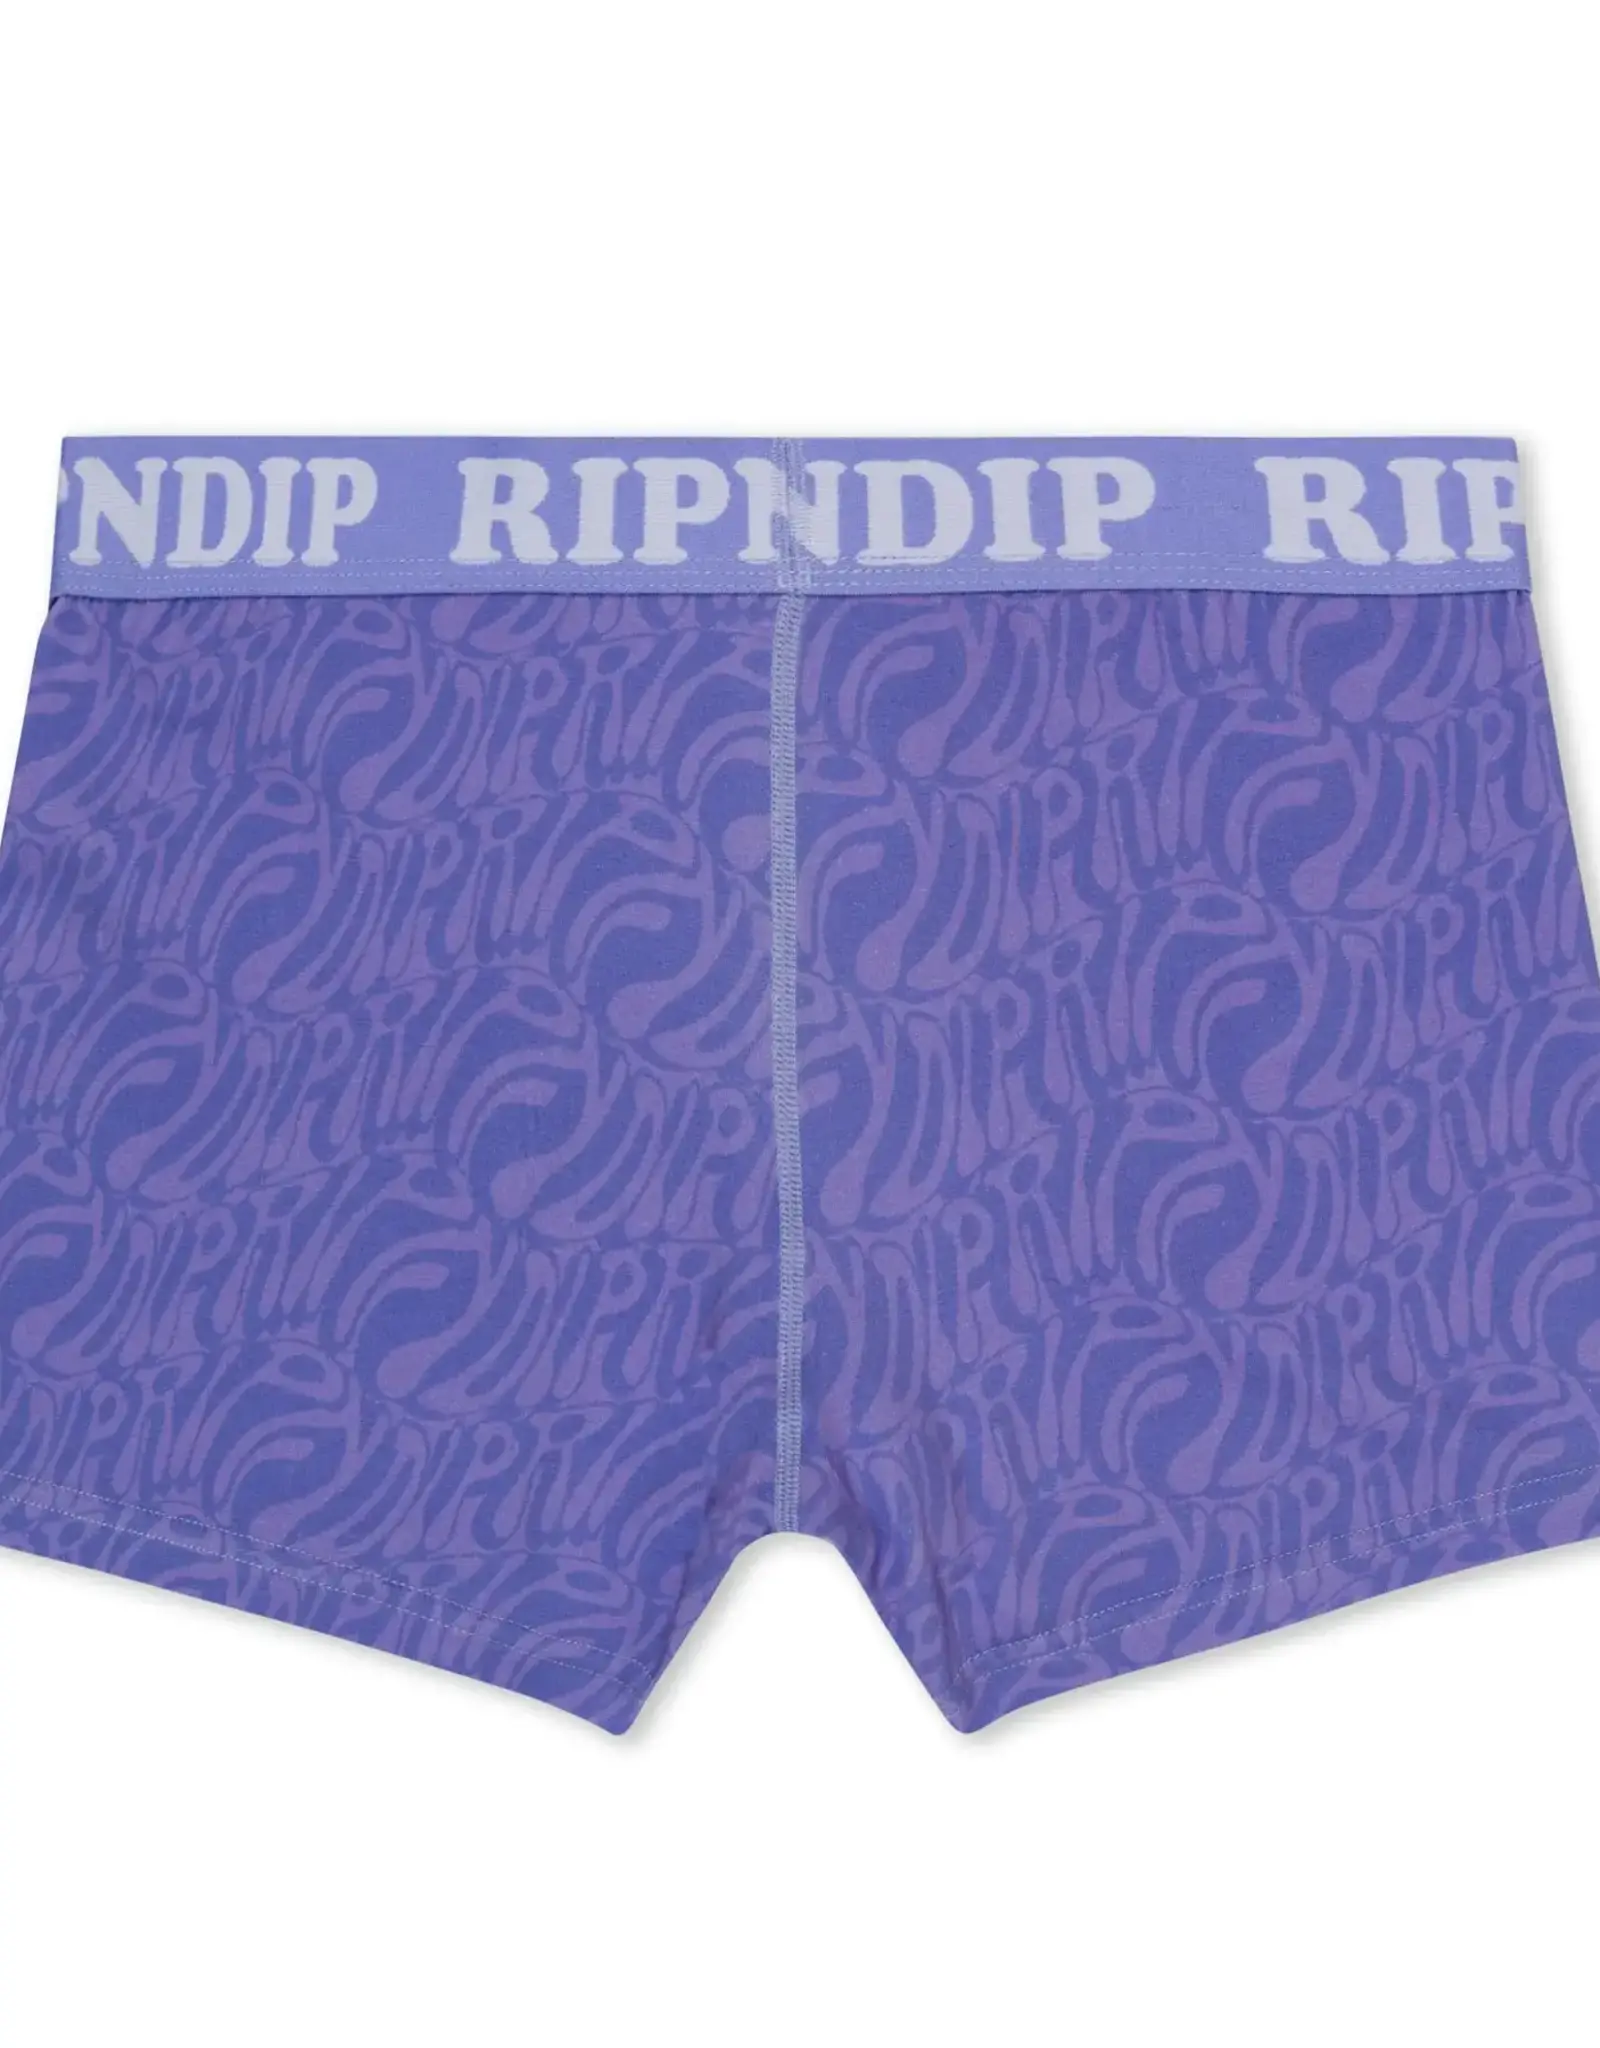 Wilshire Womens Boxers (Lilac)